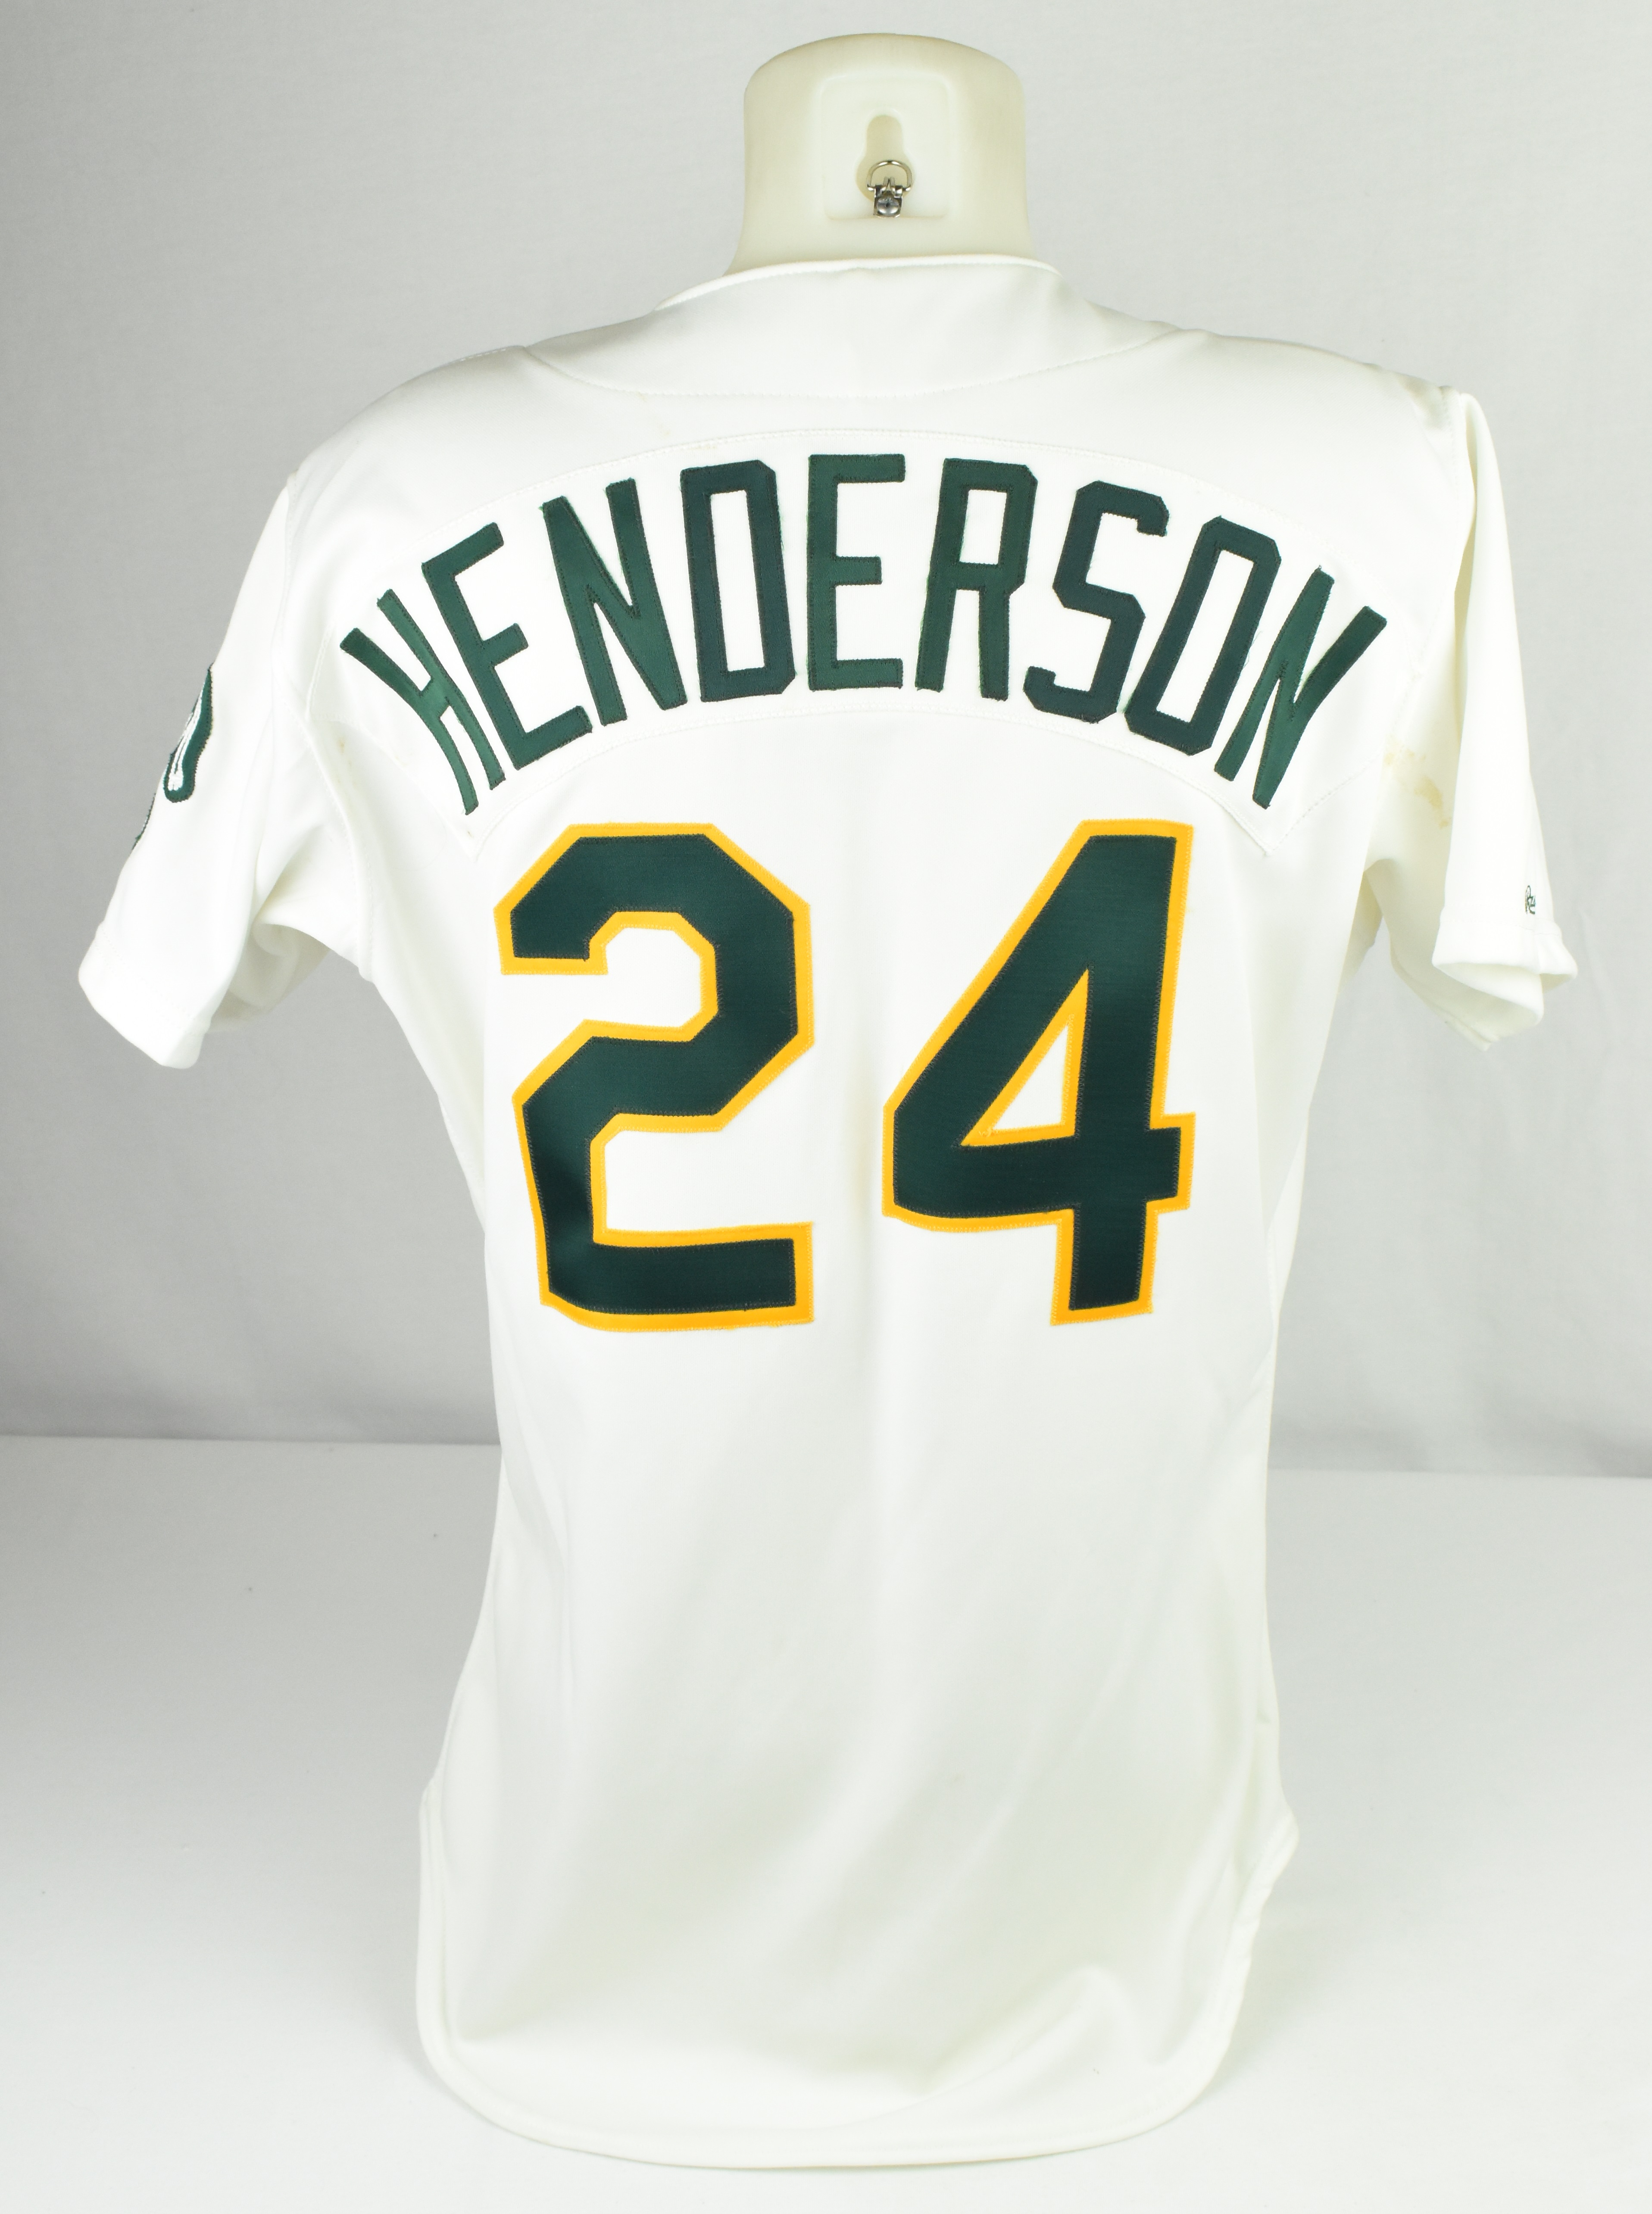 Lot Detail - 1981 Rickey Henderson Oakland A's Game-Used Jersey and Pants